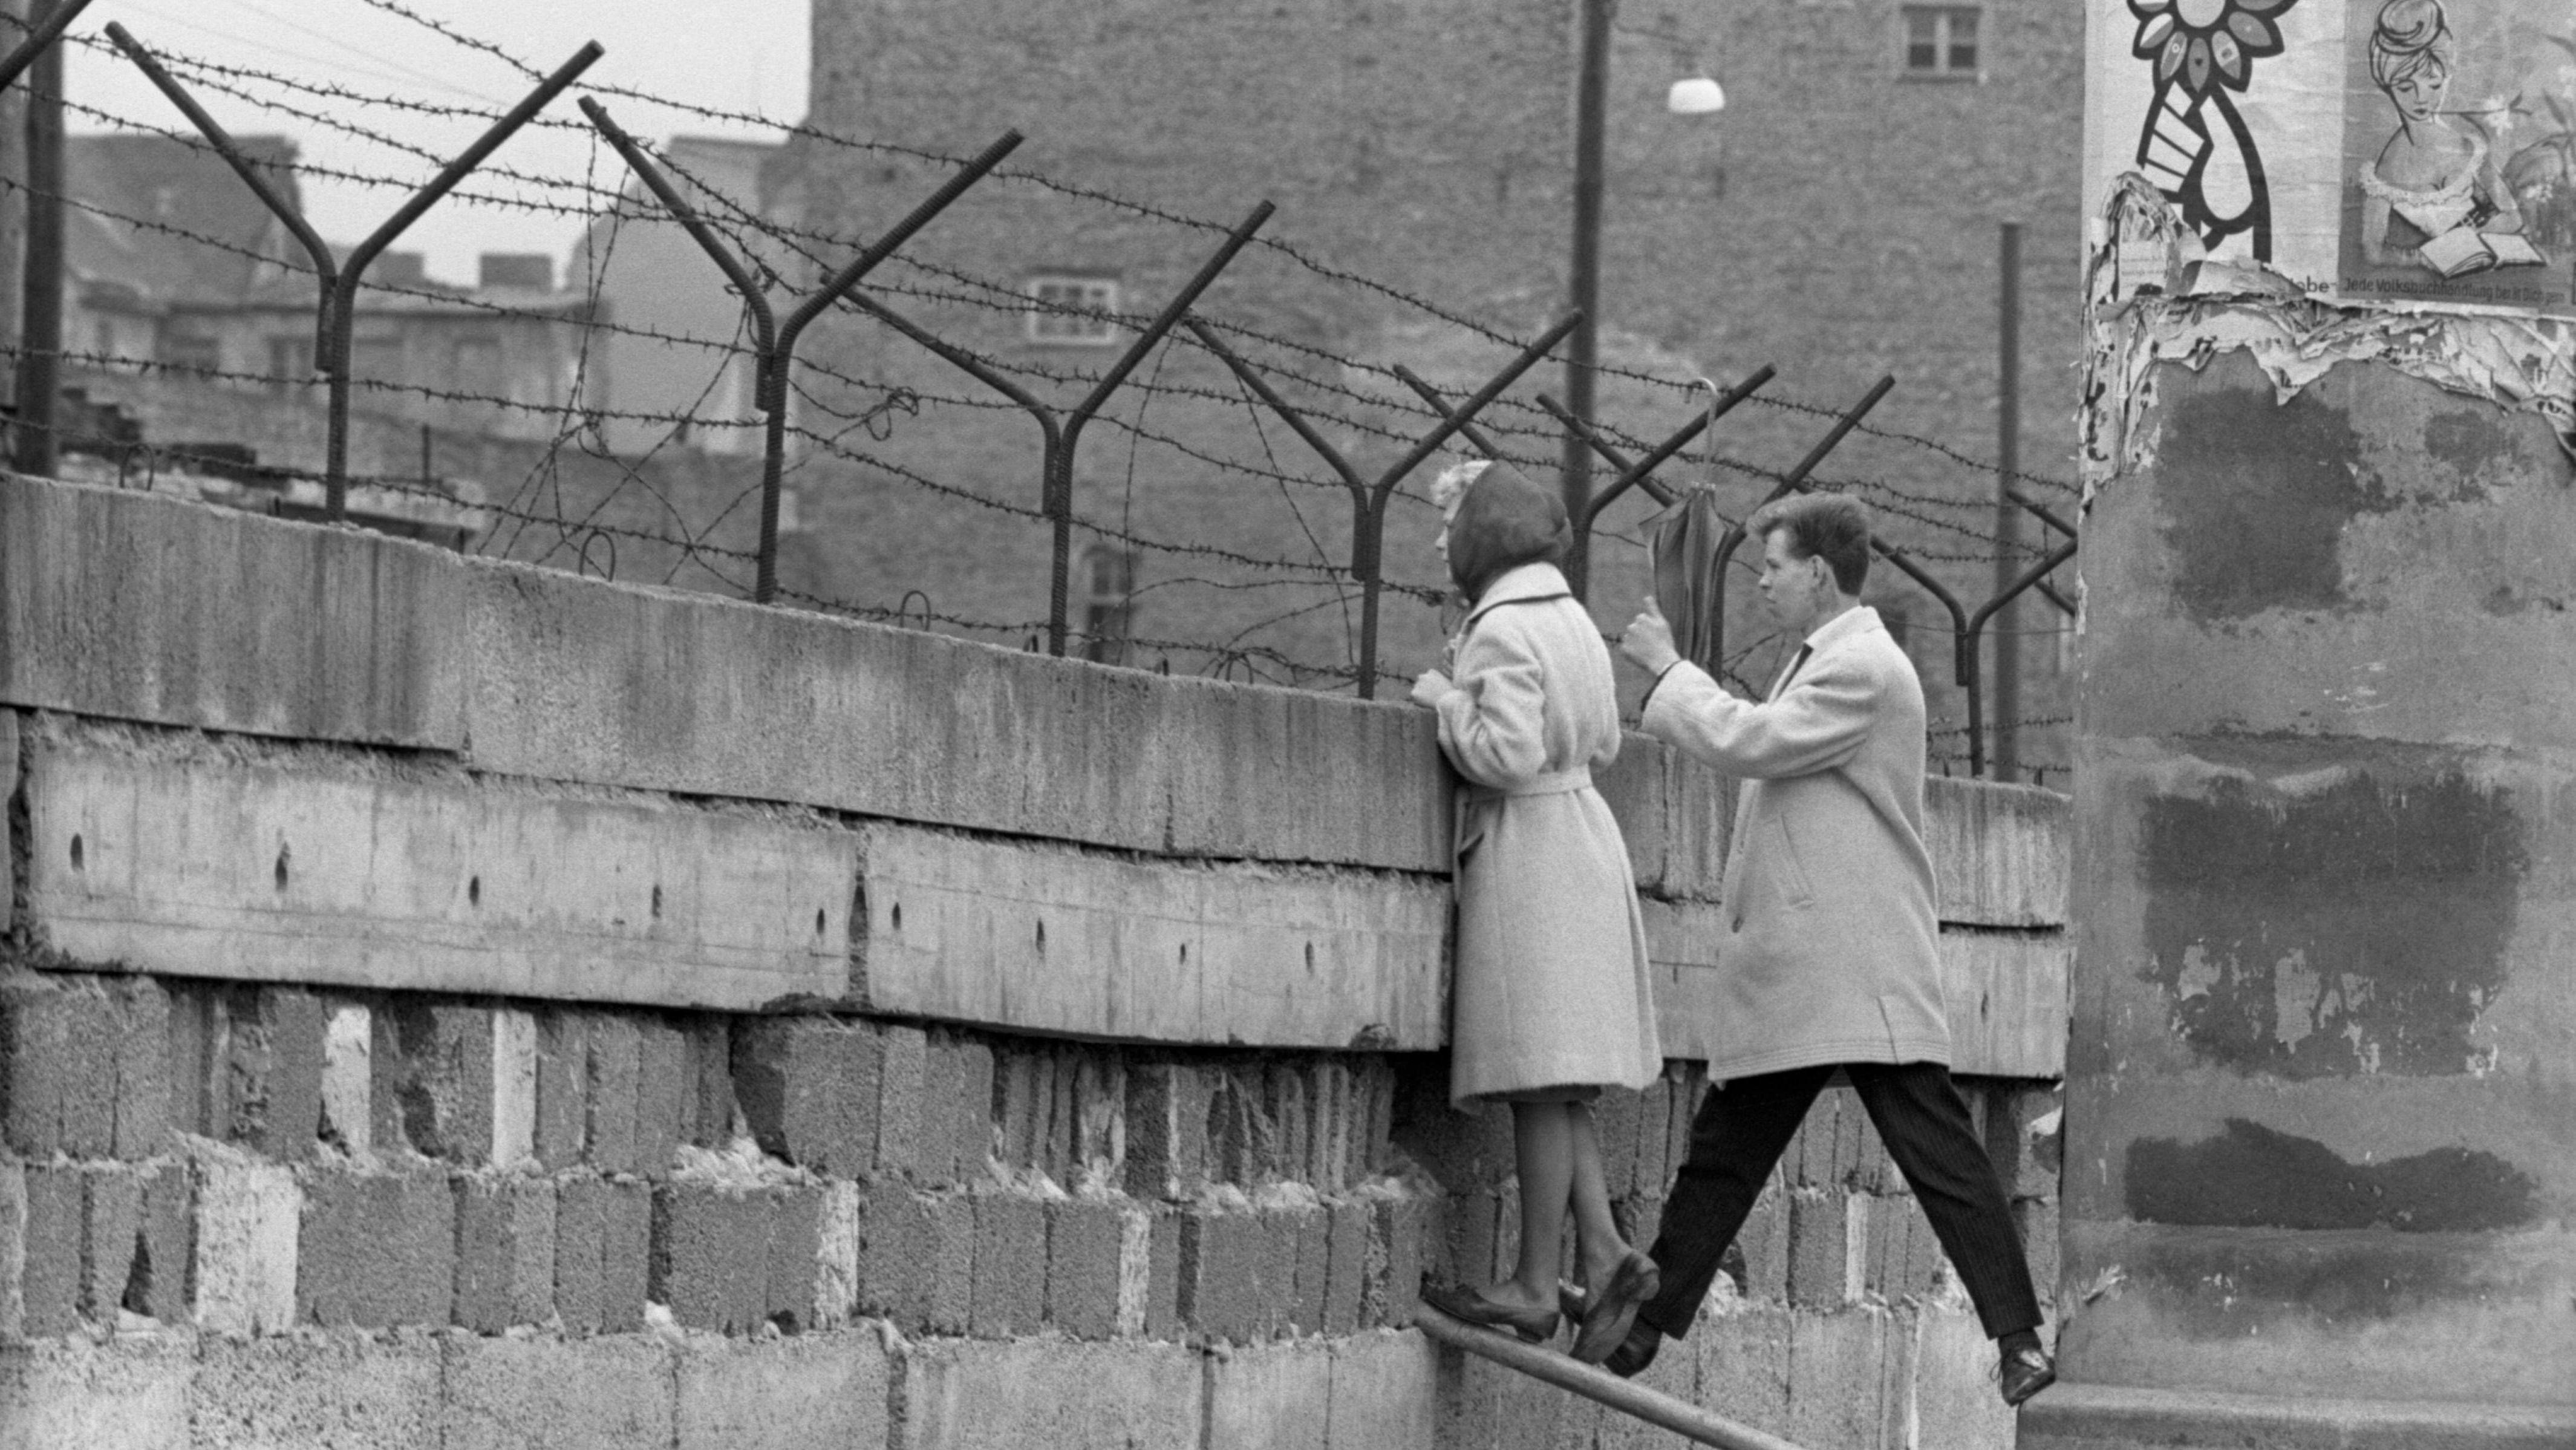 A young woman, accompanied by her boyfriend, stands at the Berlin Wall to talk to her mother on the East Berlin side in 1962. The wall divided the eastern and western sectors of the city. The US had rejected proposals by Soviet leader Nikita Khrushchev to make Berlin a "free city" with access controlled by East Germany, and in August 1961 Communist authorities began construction on the wall to prevent East Germans from fleeing to West Berlin.